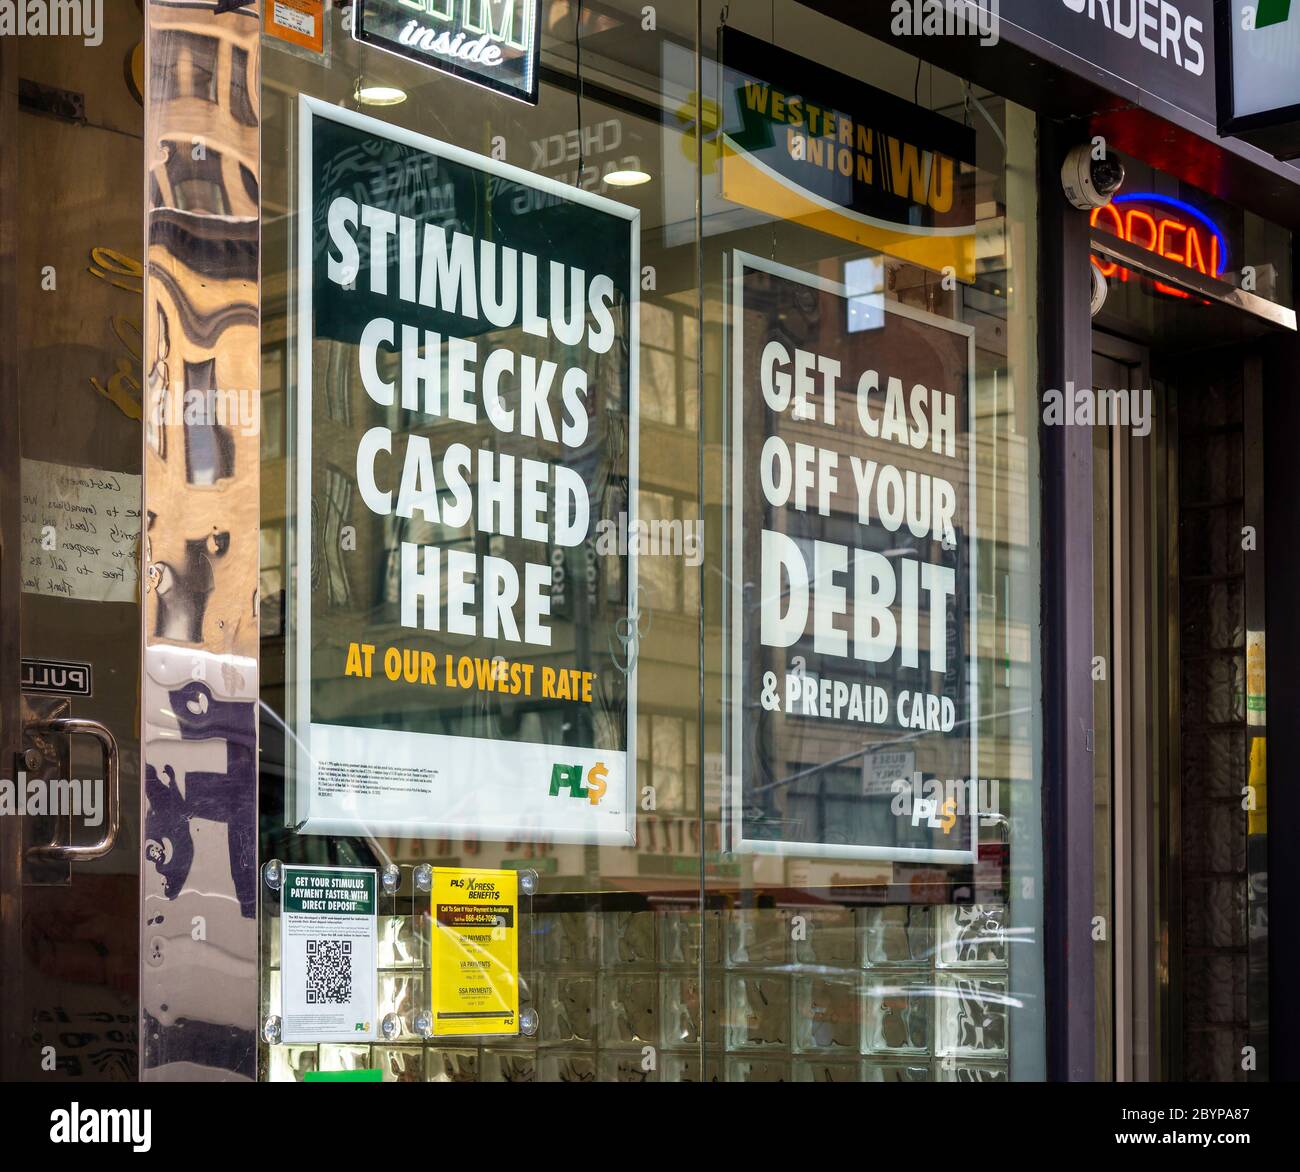 A check cashing business in New York on Friday, May 29, 2020 advertises that they cash stimulus checks. (© Richard B. Levine) Stock Photo